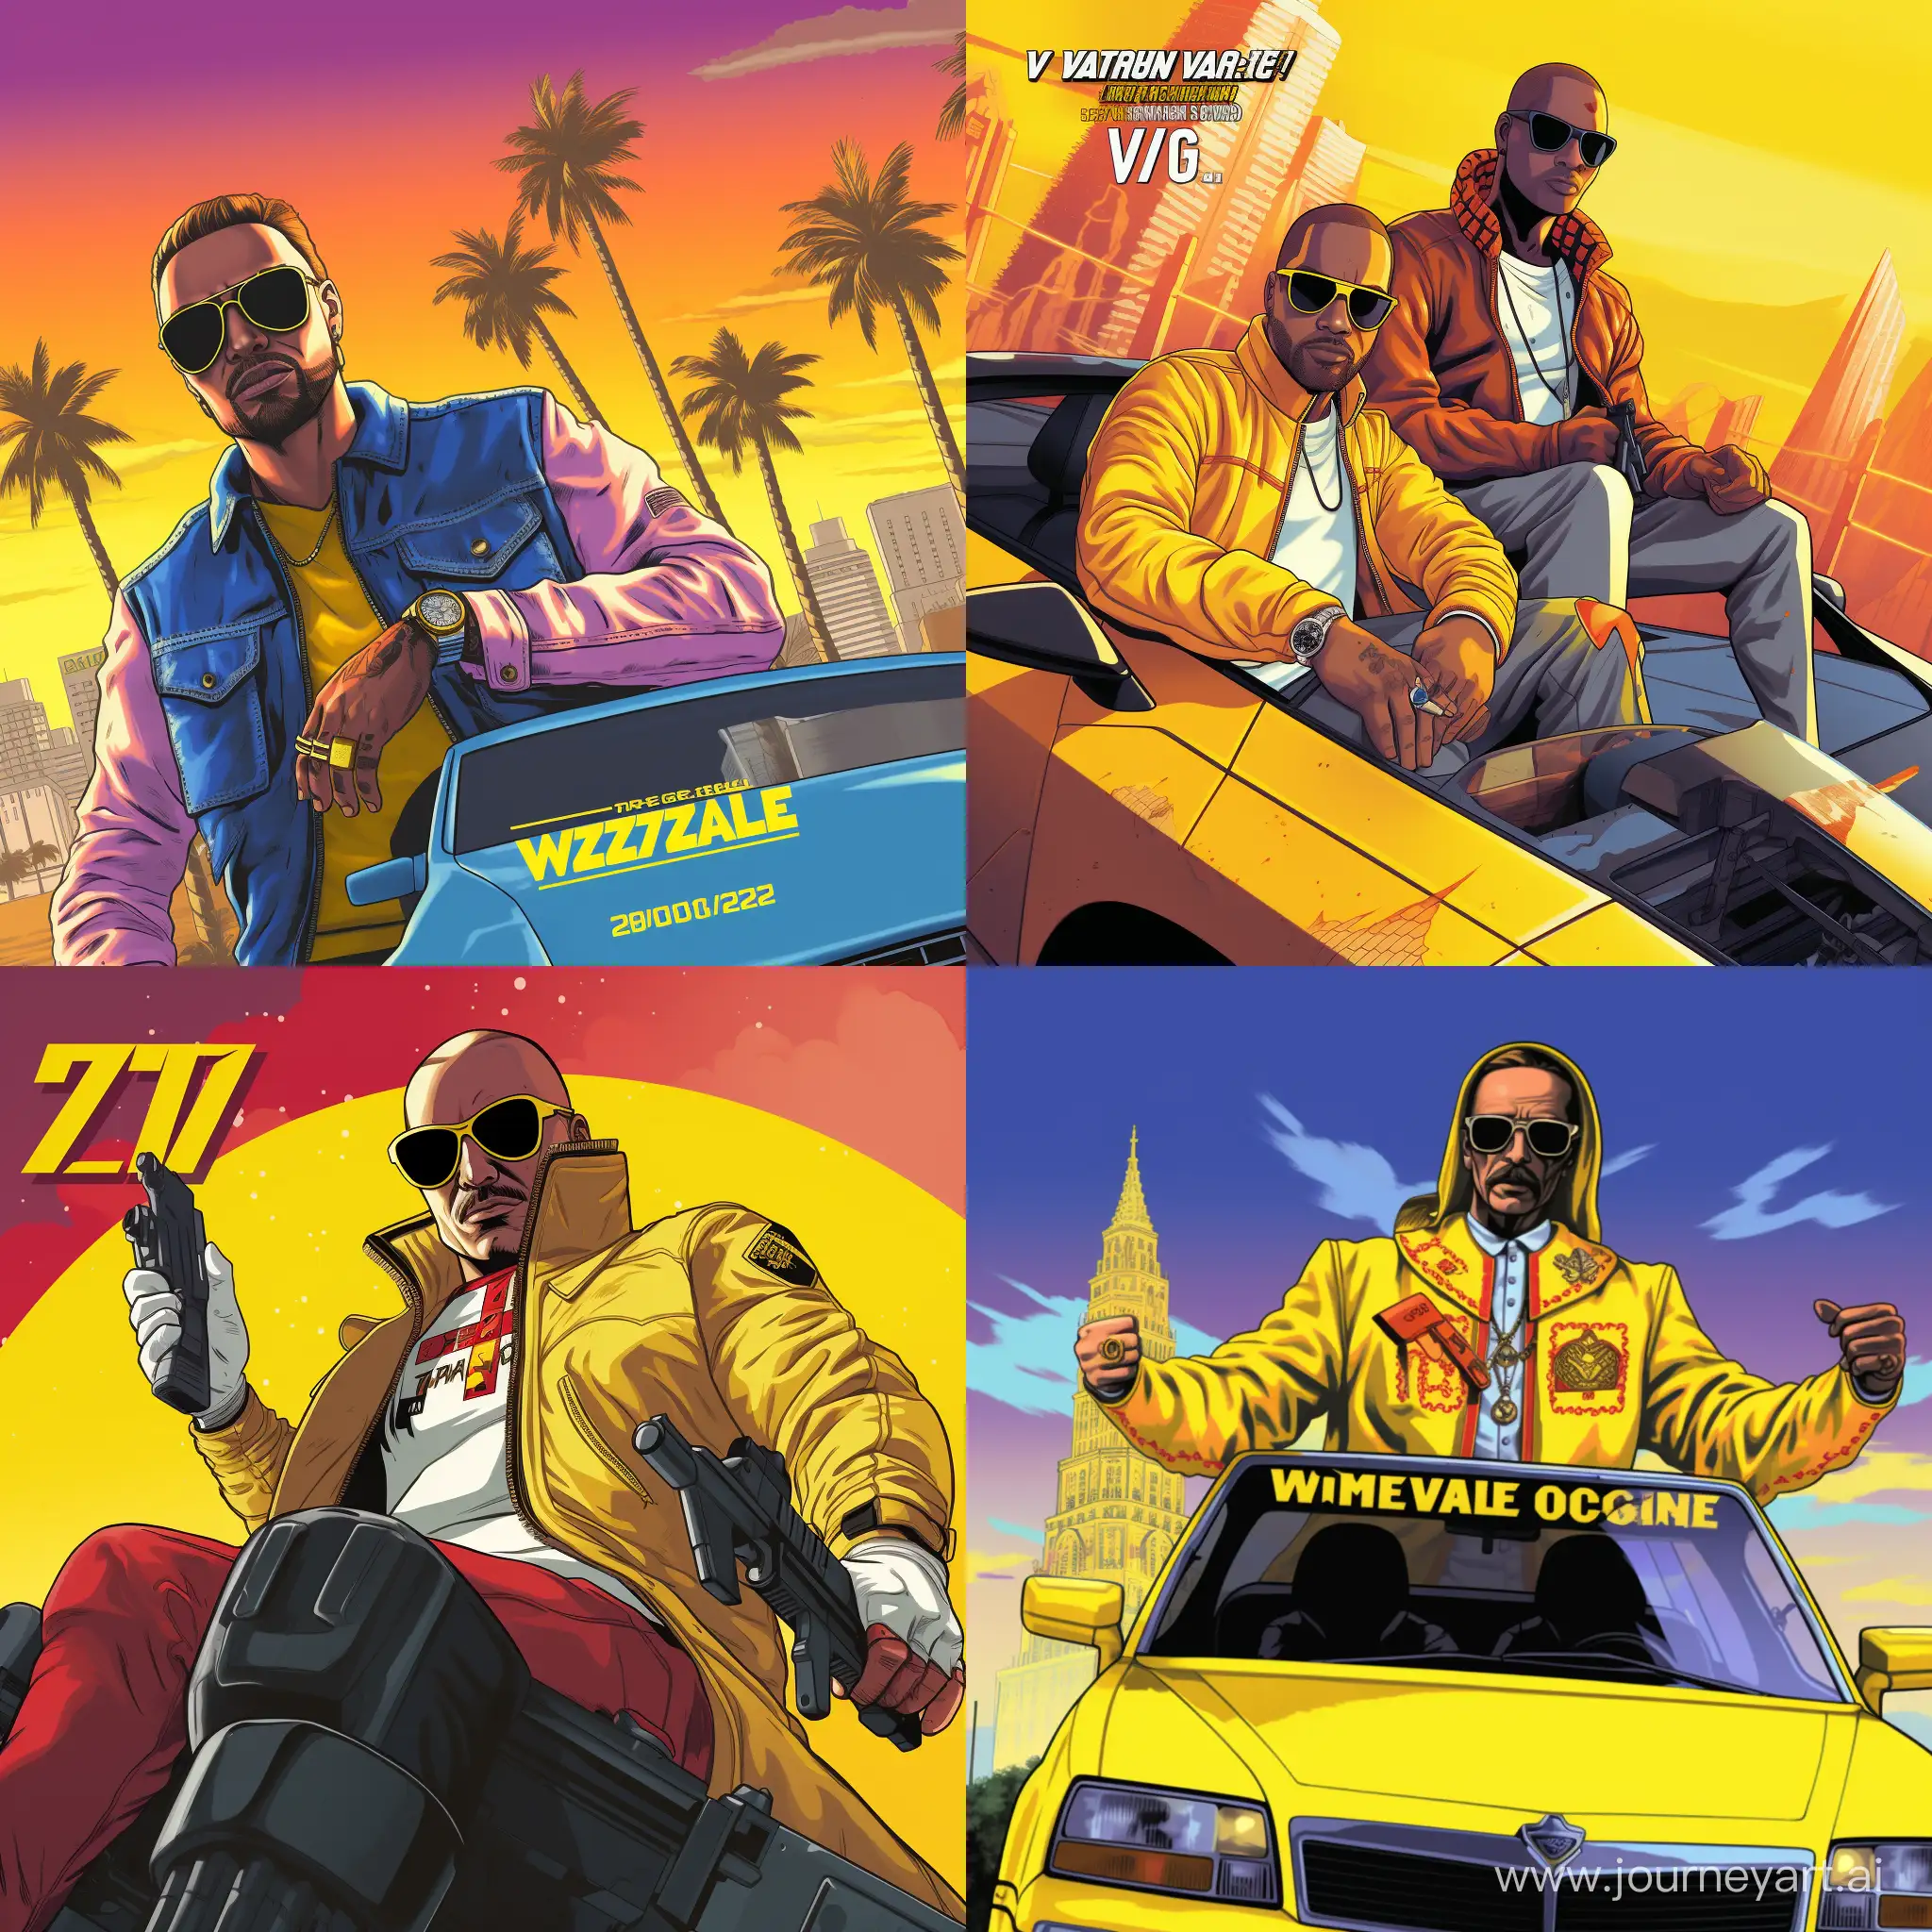 Make a fake game box cover for game "GTA: Vado Vice 2137" include the name on the cover, with view on night miami, with pope John Paul 2 (white guy with yellow face) wearing casual clothes and leather jacket